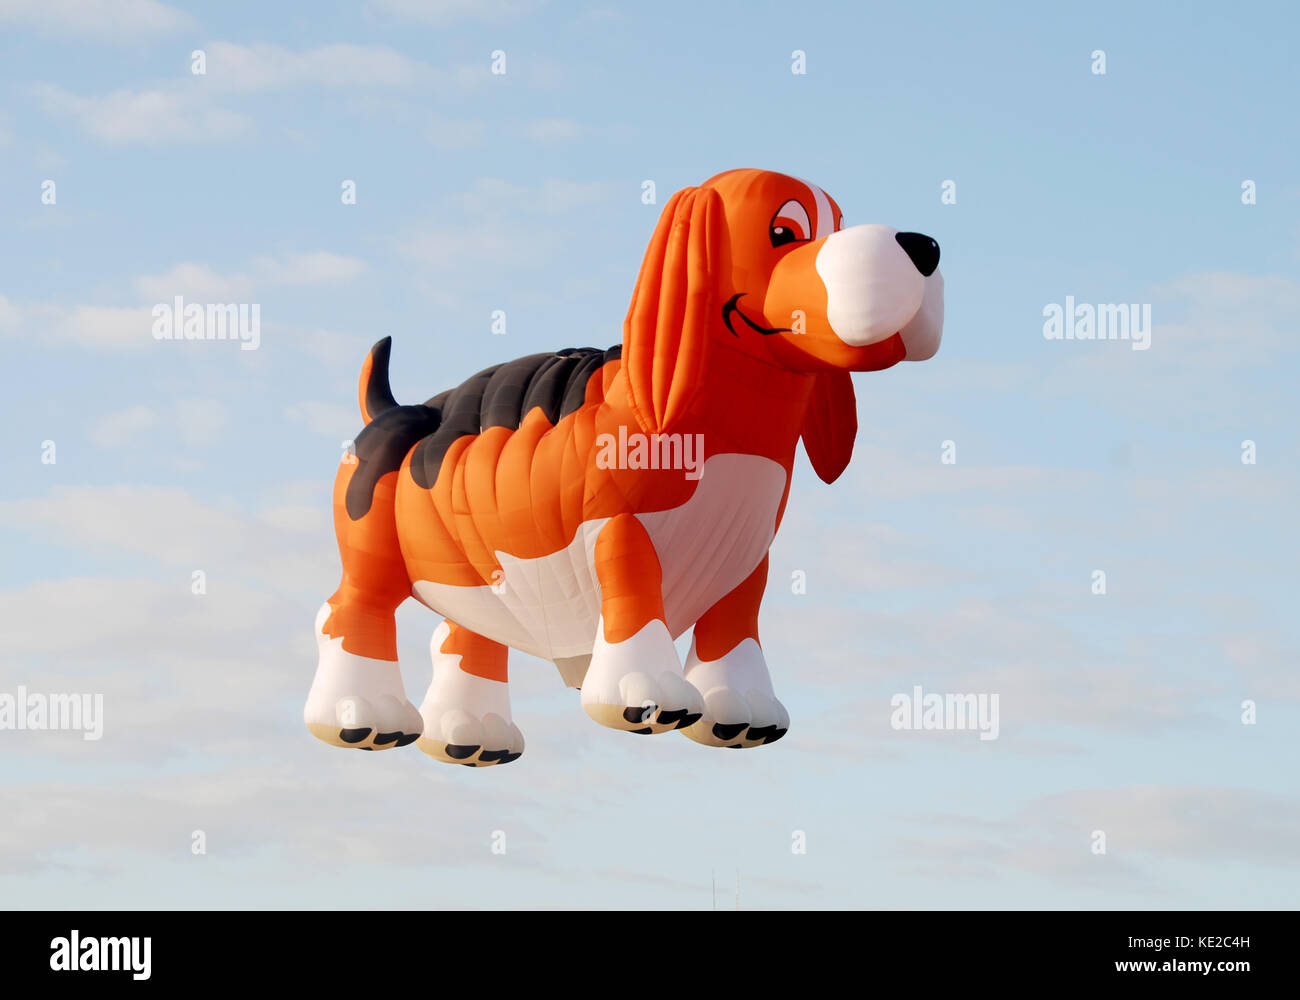 Large dog shaped inflatable balloon floating in the sky Stock Photo